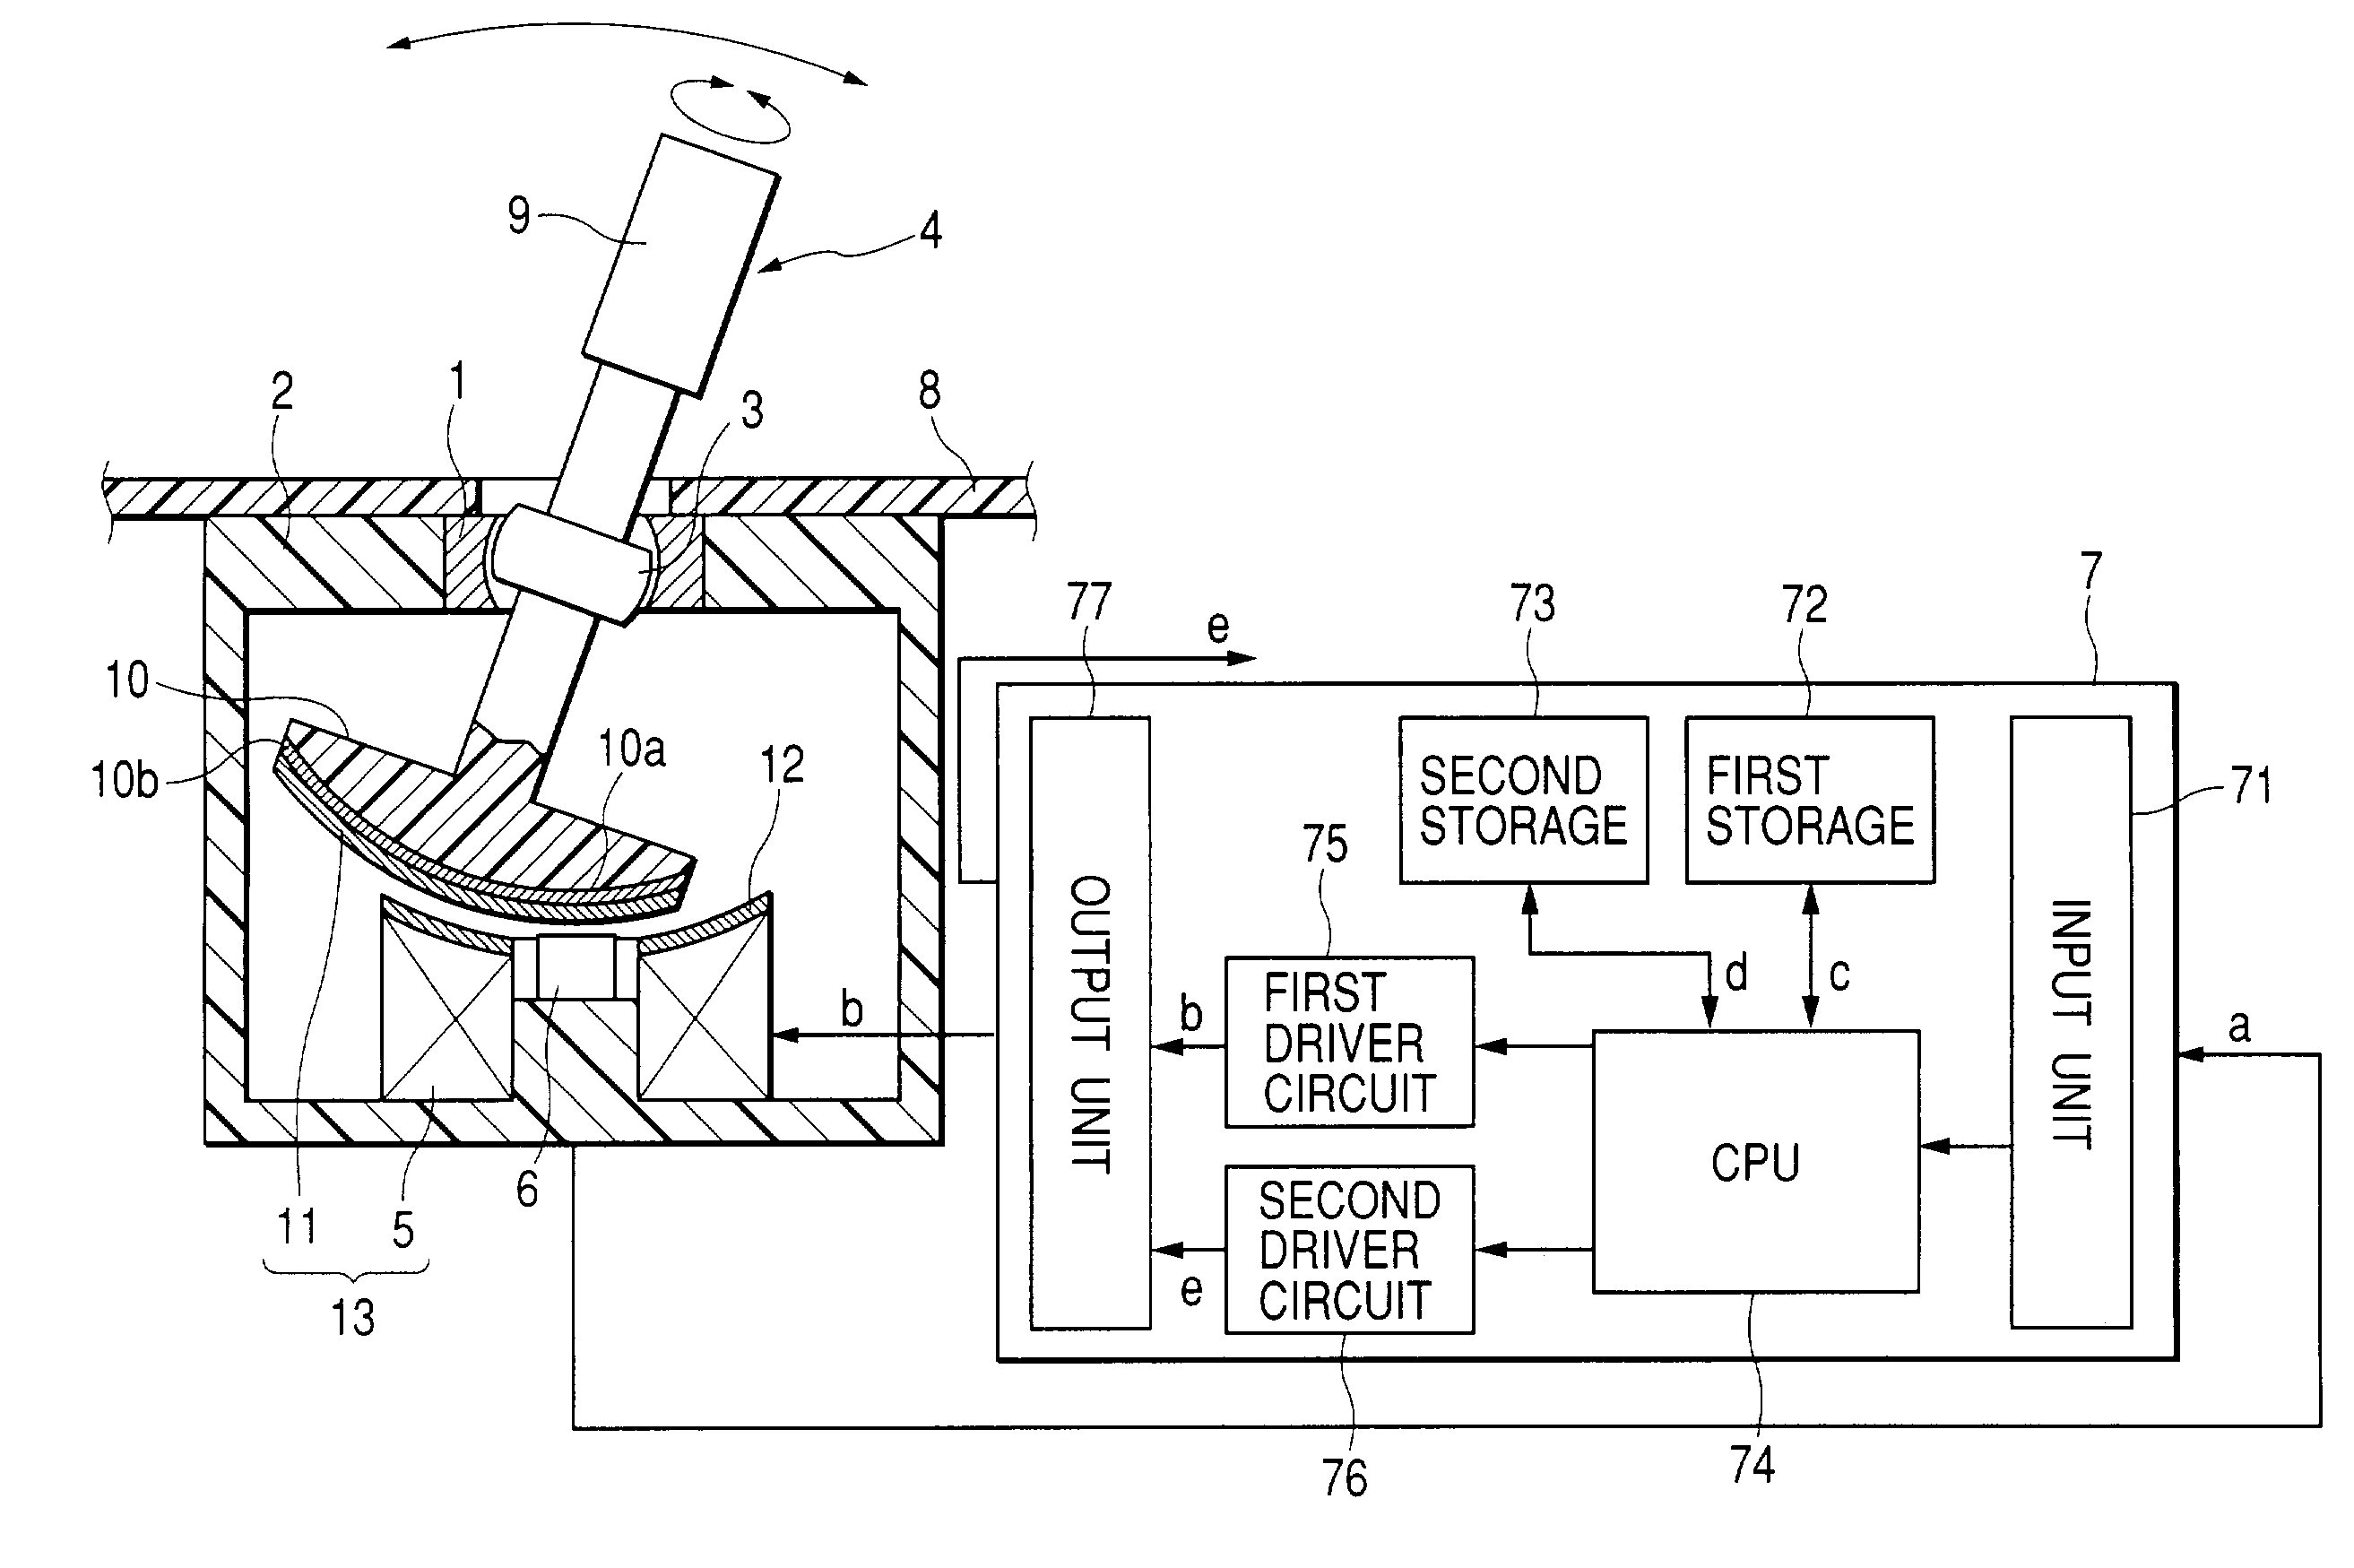 Lever handle type haptic input apparatus equipped with electromagnetic brake